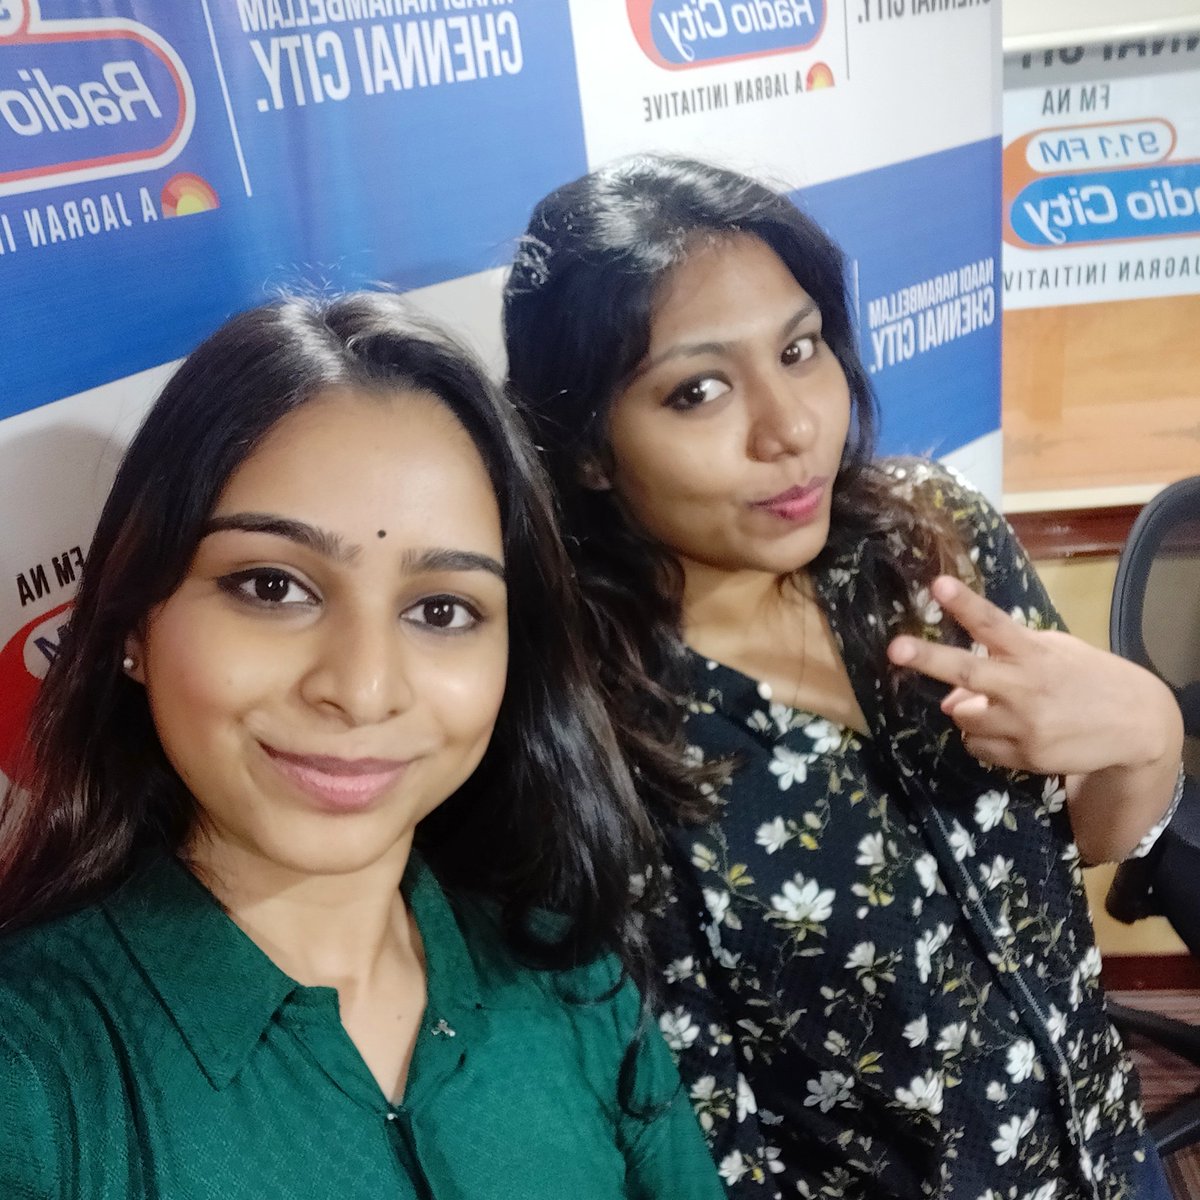 Gotta have loads of fun doing this interview. Hope you guys have fun listening to us as well. Tune in to @radiocityindia 91.1 FM at 5pm tomorrow, to listen to the show 'Freedom Hours' hosted by @rj_nancy_